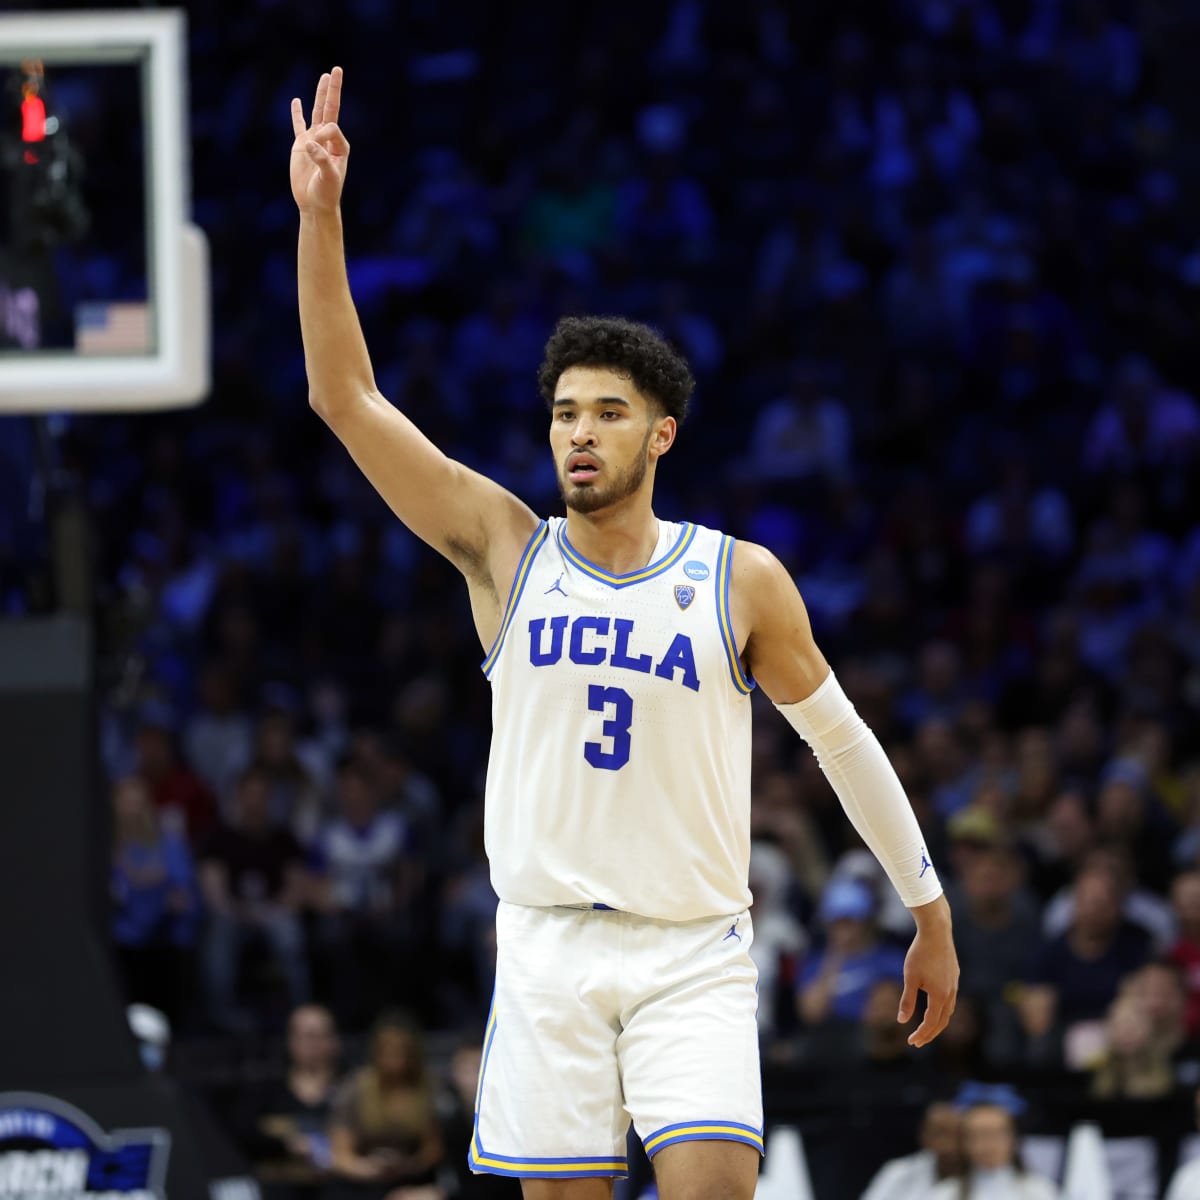 Johnny Juzang raises NBA draft stock with a playoffs to remember